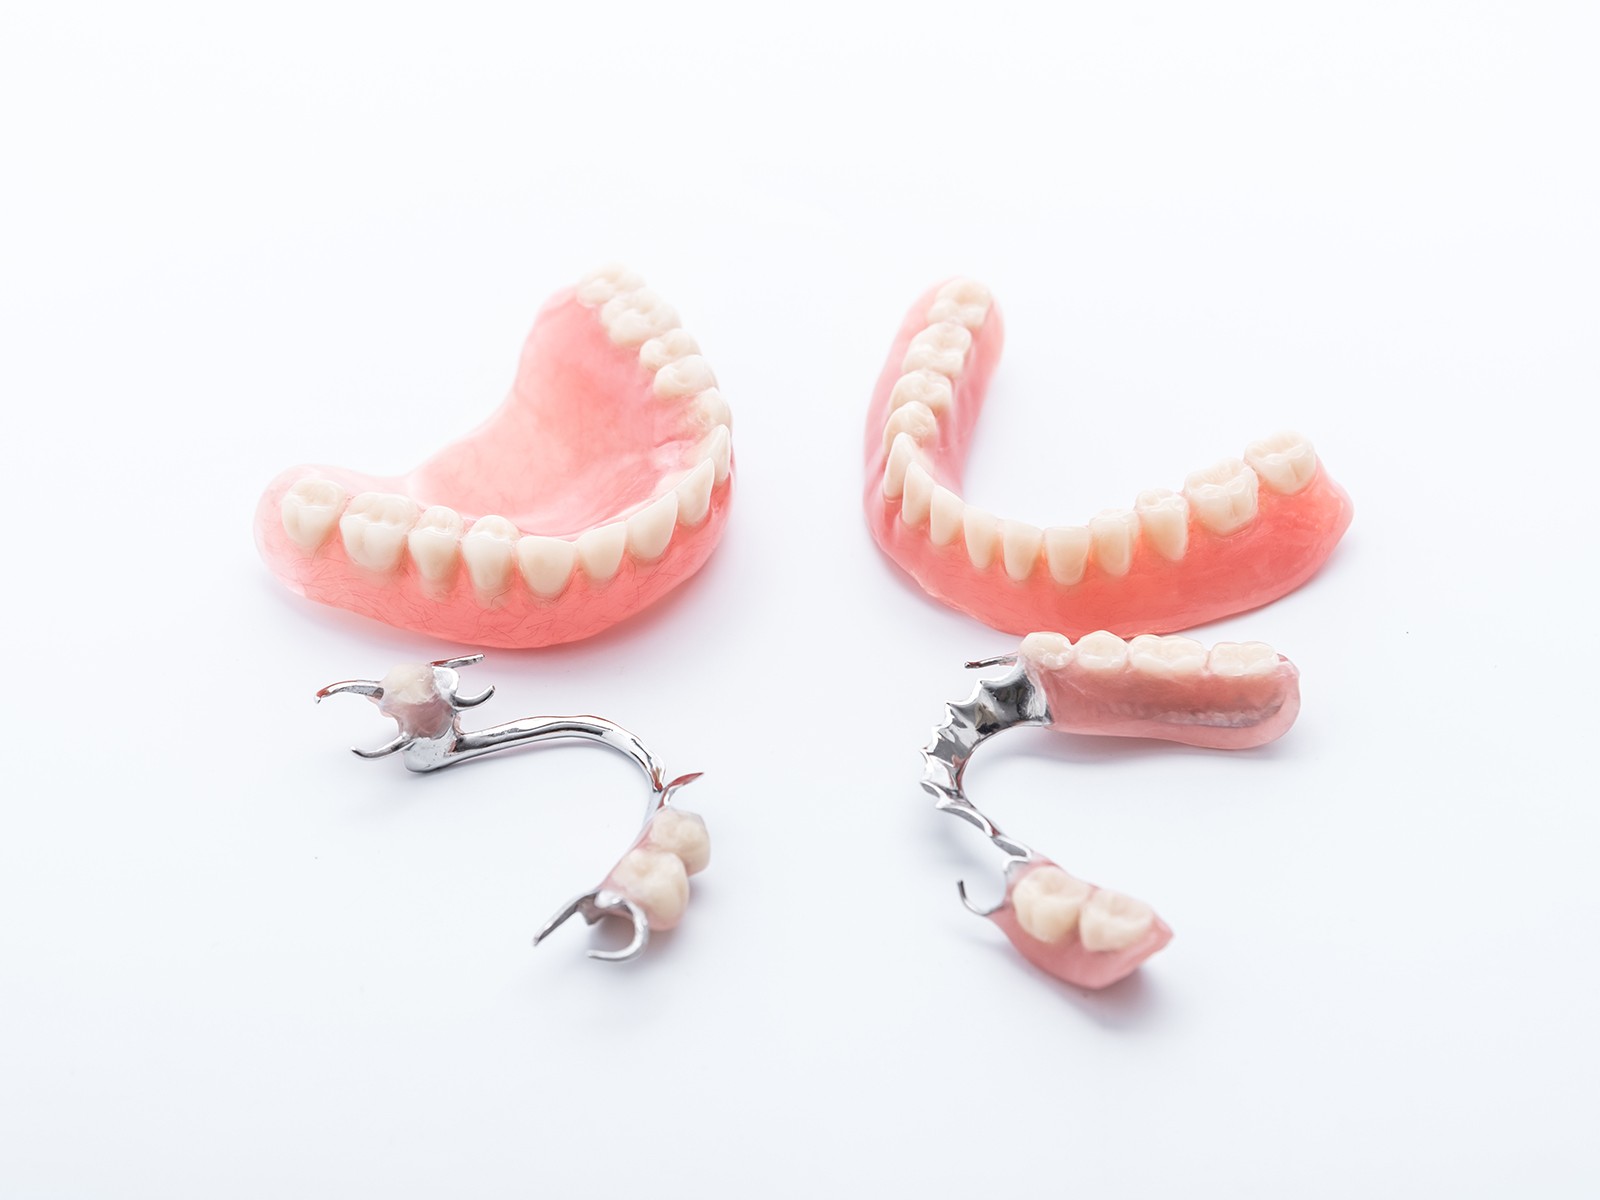 How can I Make My Dentures Look real?